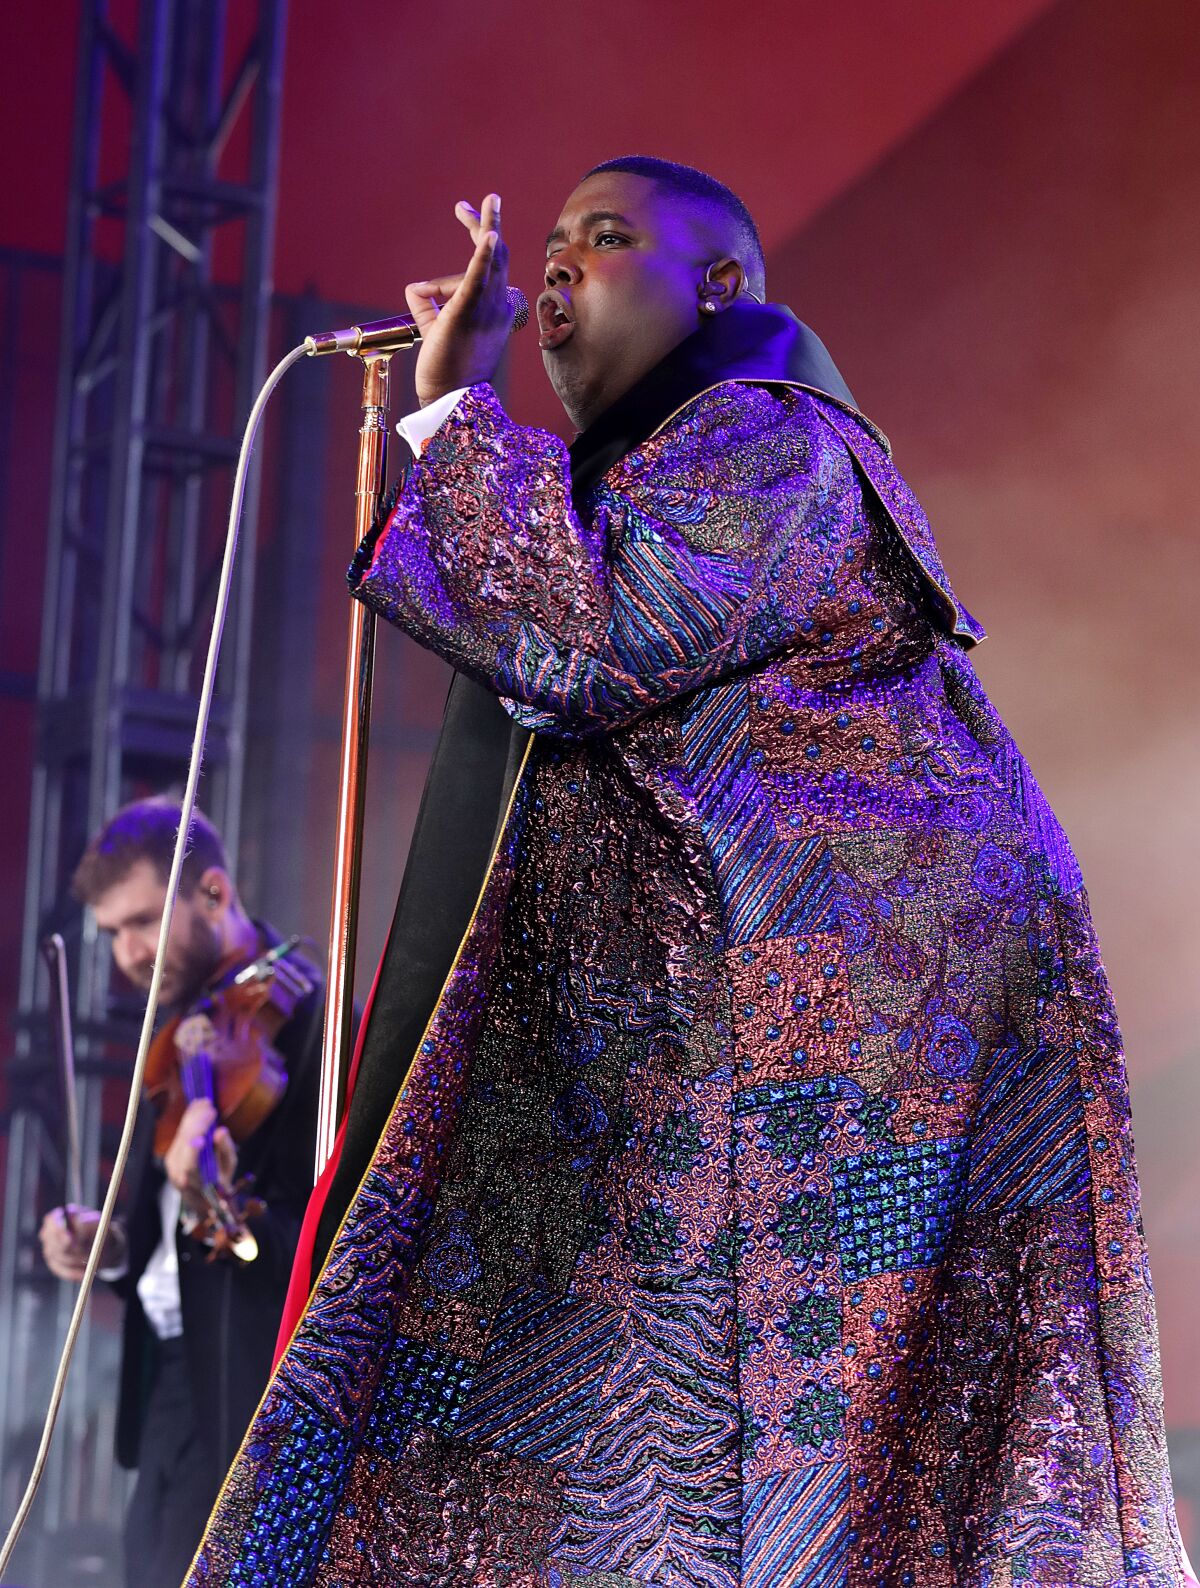 A man wearing a brocade overcoat sings into a microphone